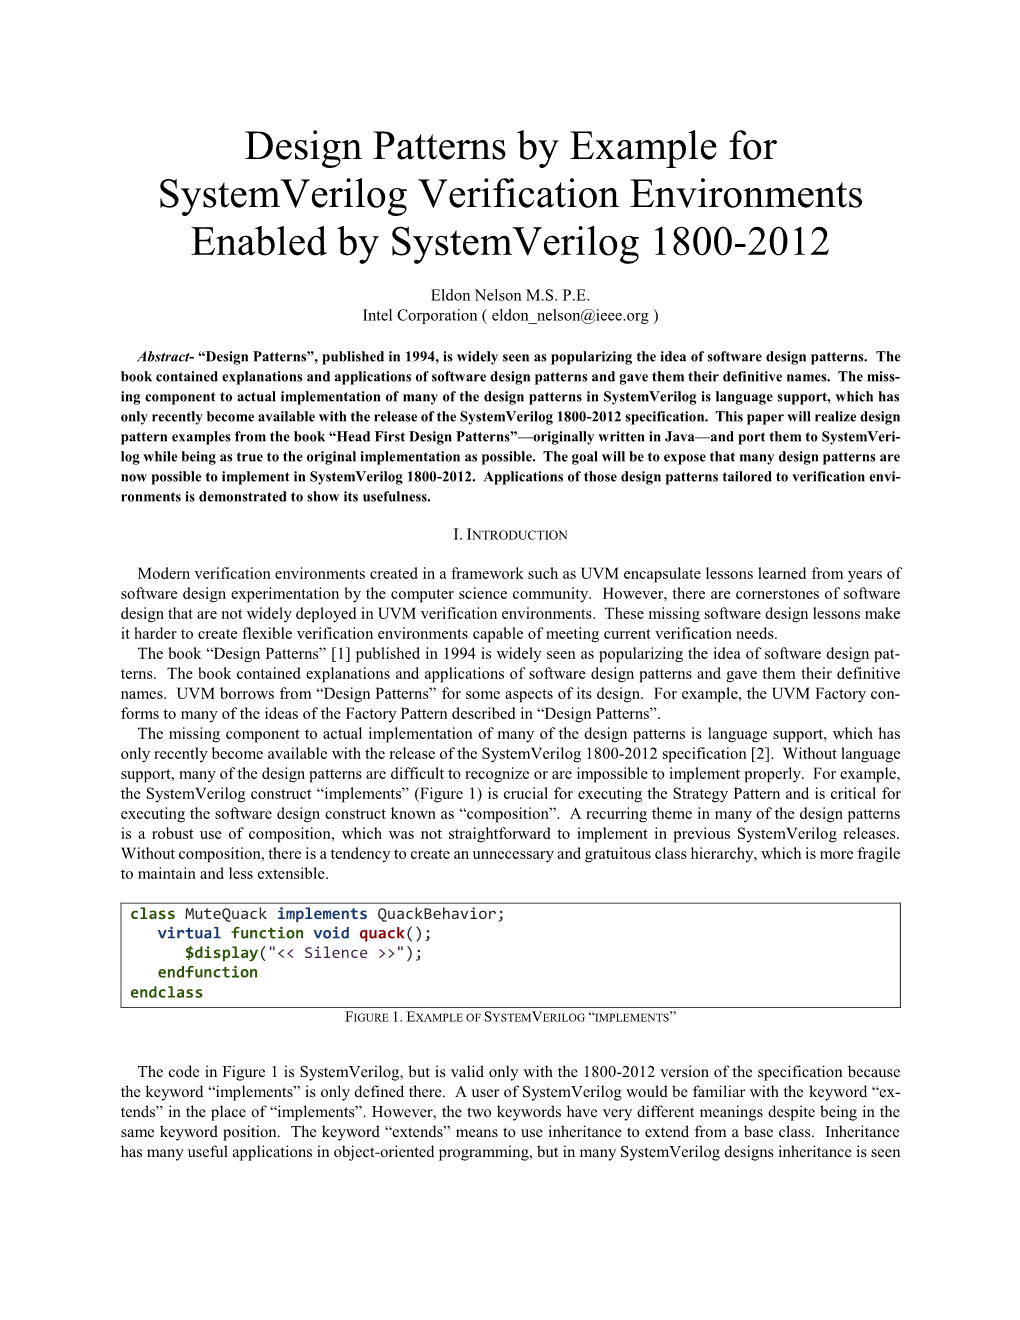 Design Patterns by Example for Systemverilog Verification Environments Enabled by Systemverilog 1800-2012